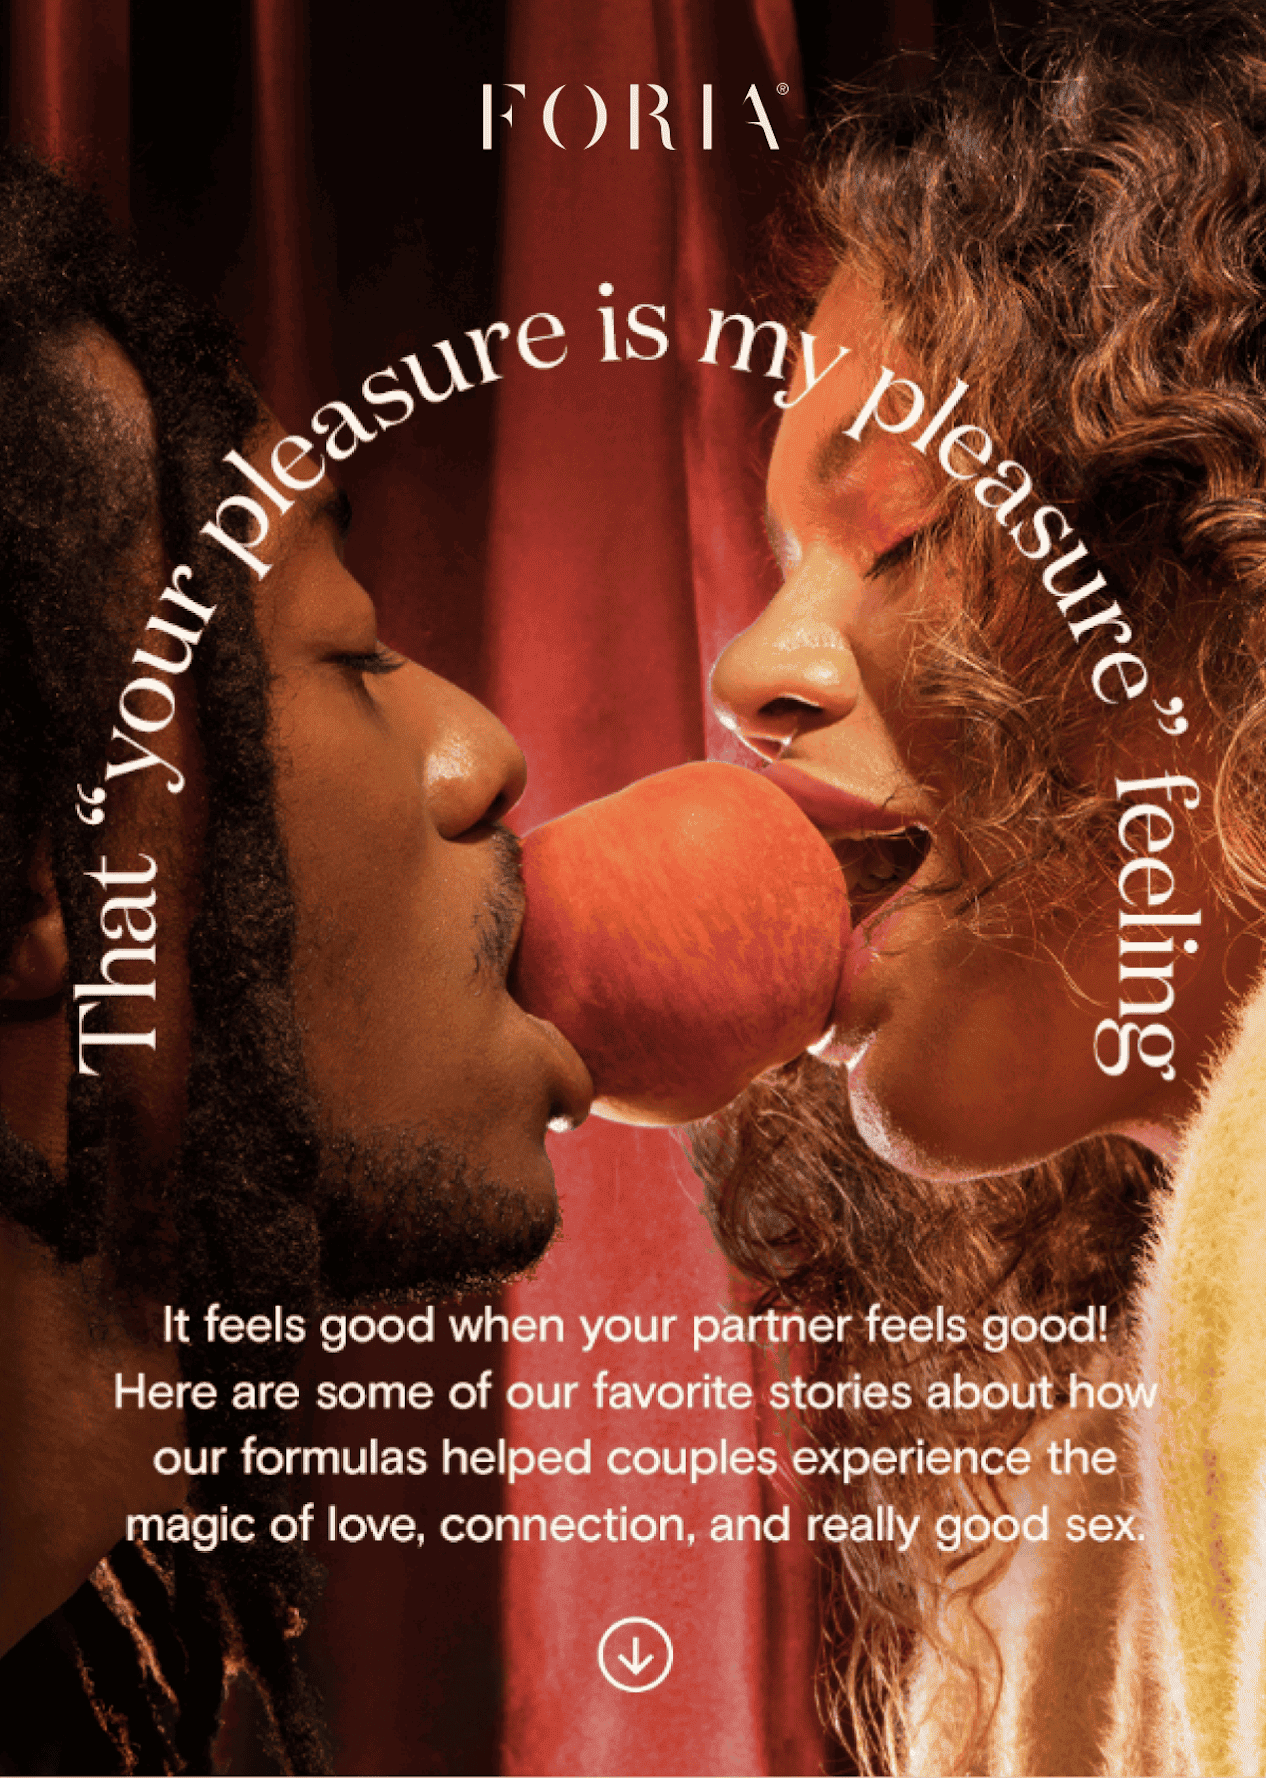 That “your pleasure is my pleasure” feeling: It feels good when your partner feels good! Here are some of our favorite stories about how our formulas helped couples experience the magic of love, connection, and really good sex.